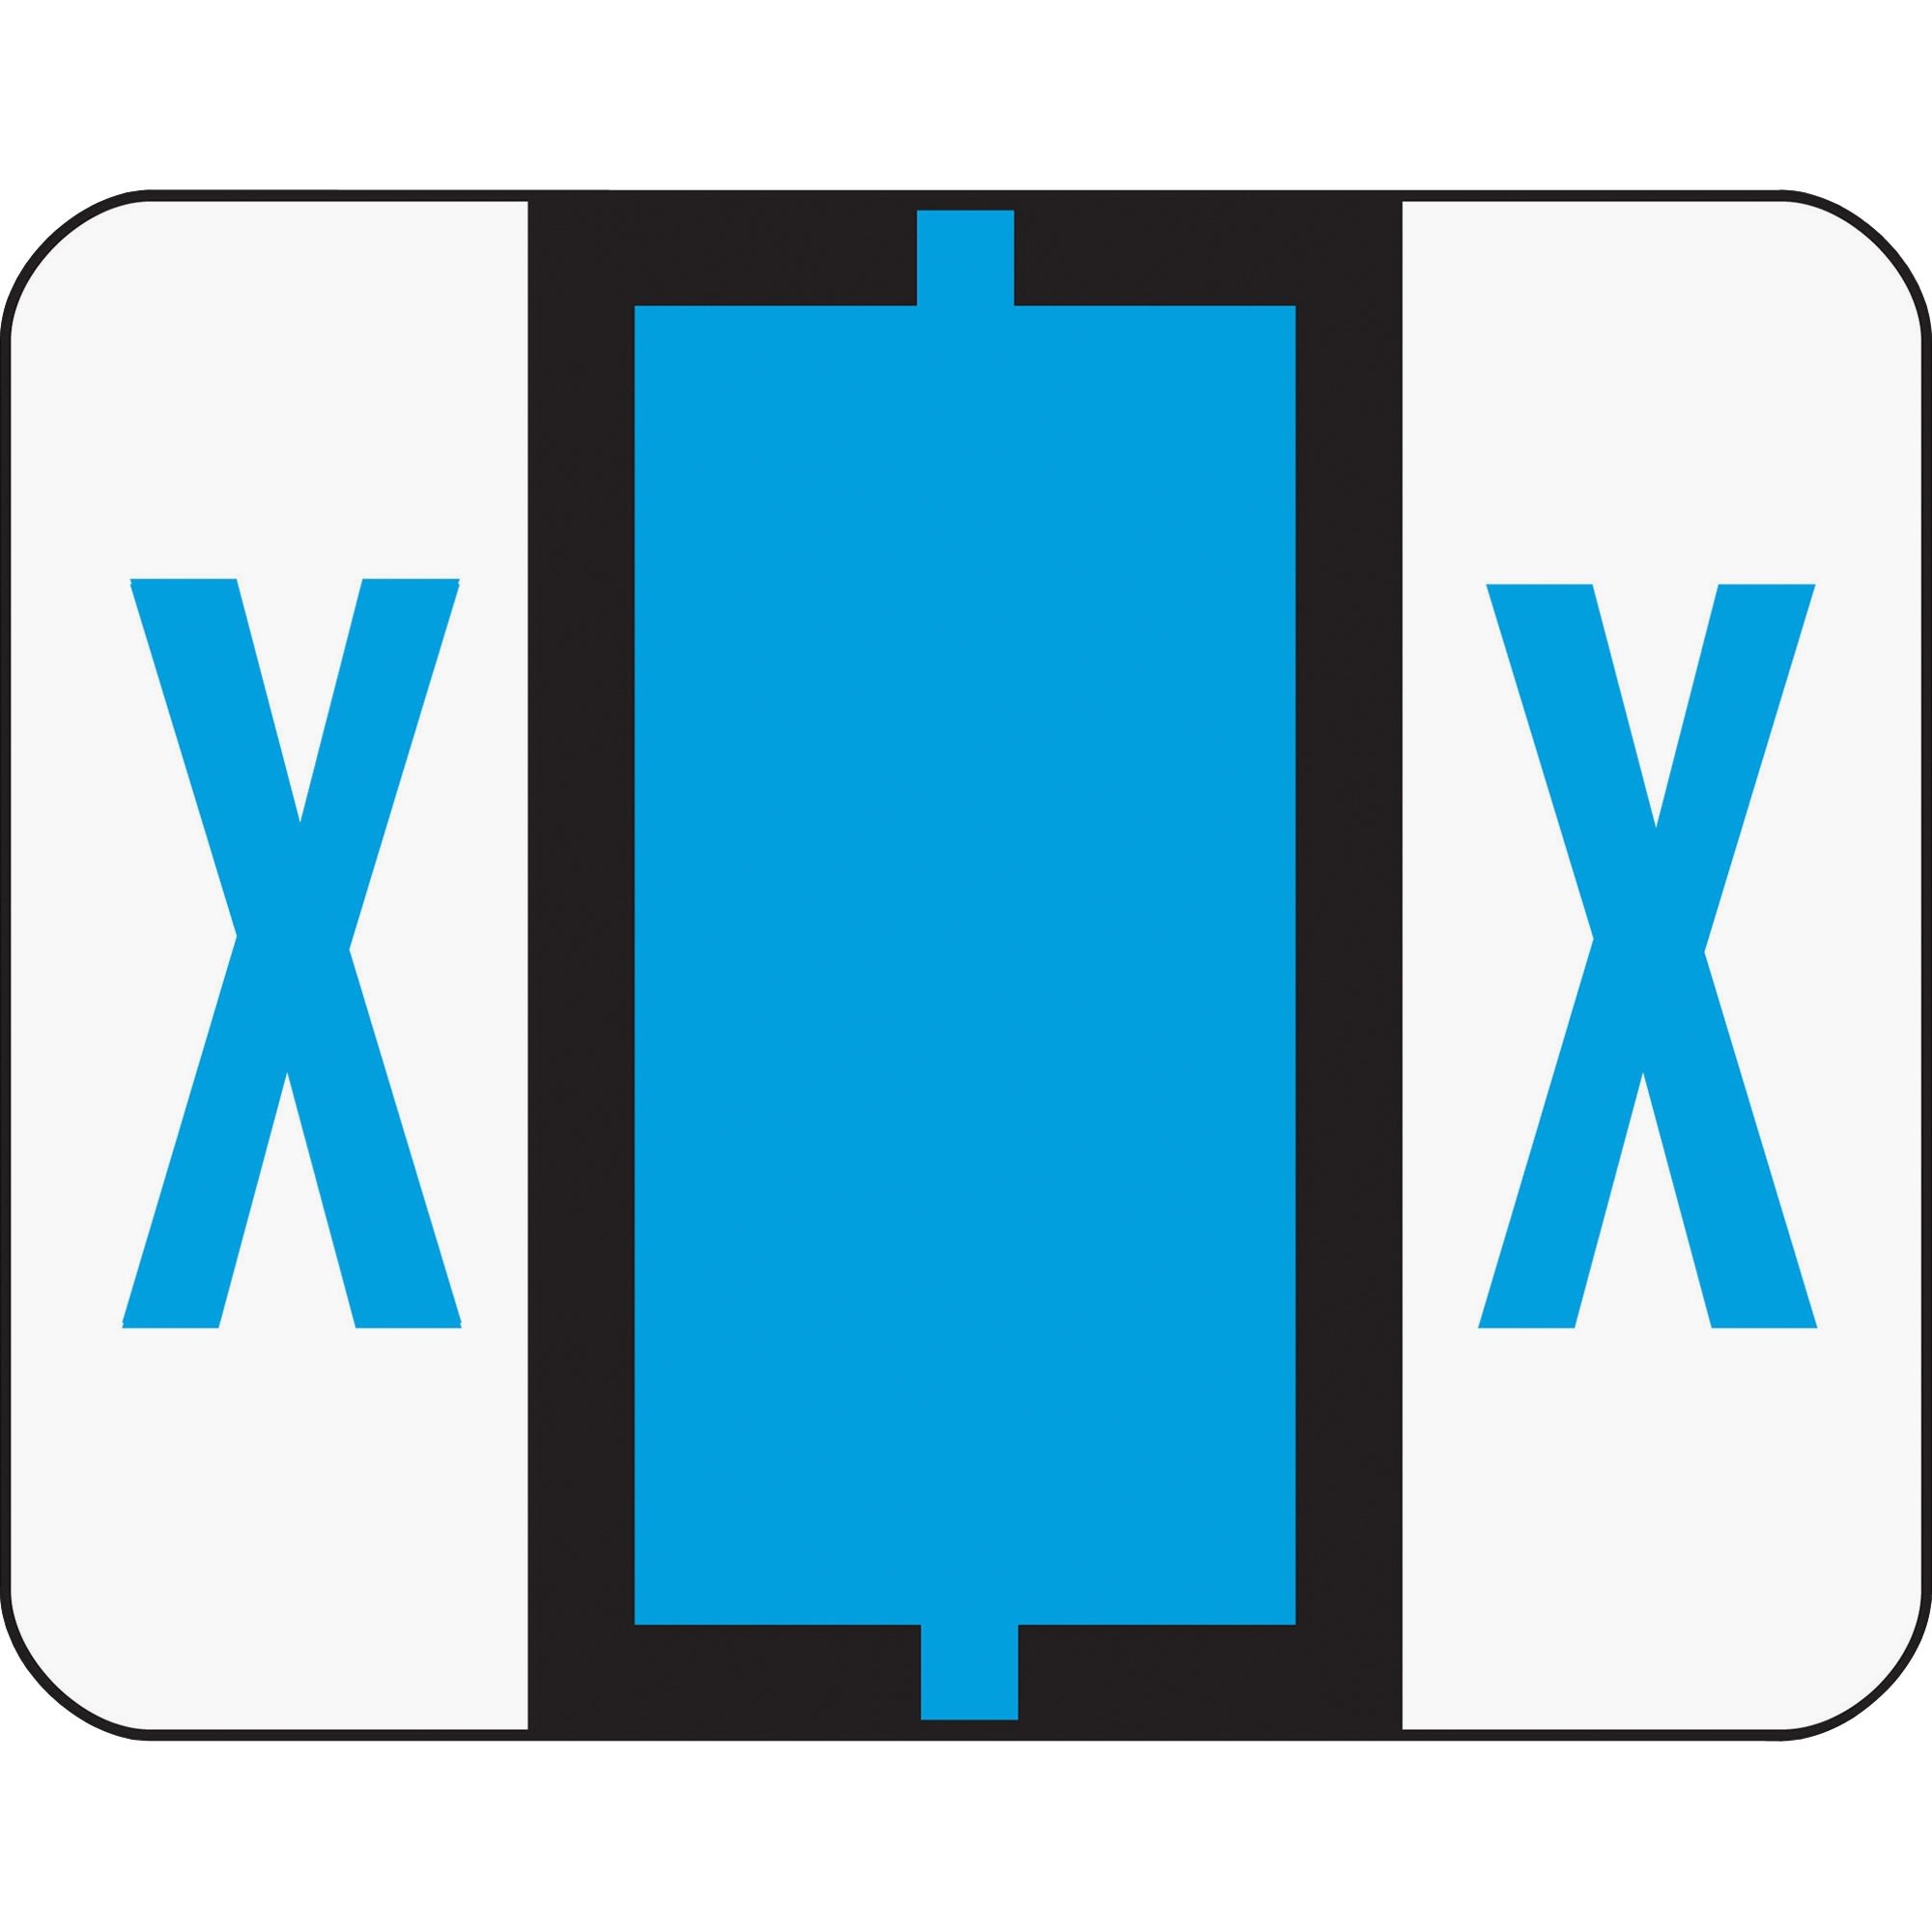 Smead 67094 A-Z Color-Coded Bar-Style End Tab Labels, Letter X, Blue, 500/Roll - image 3 of 3